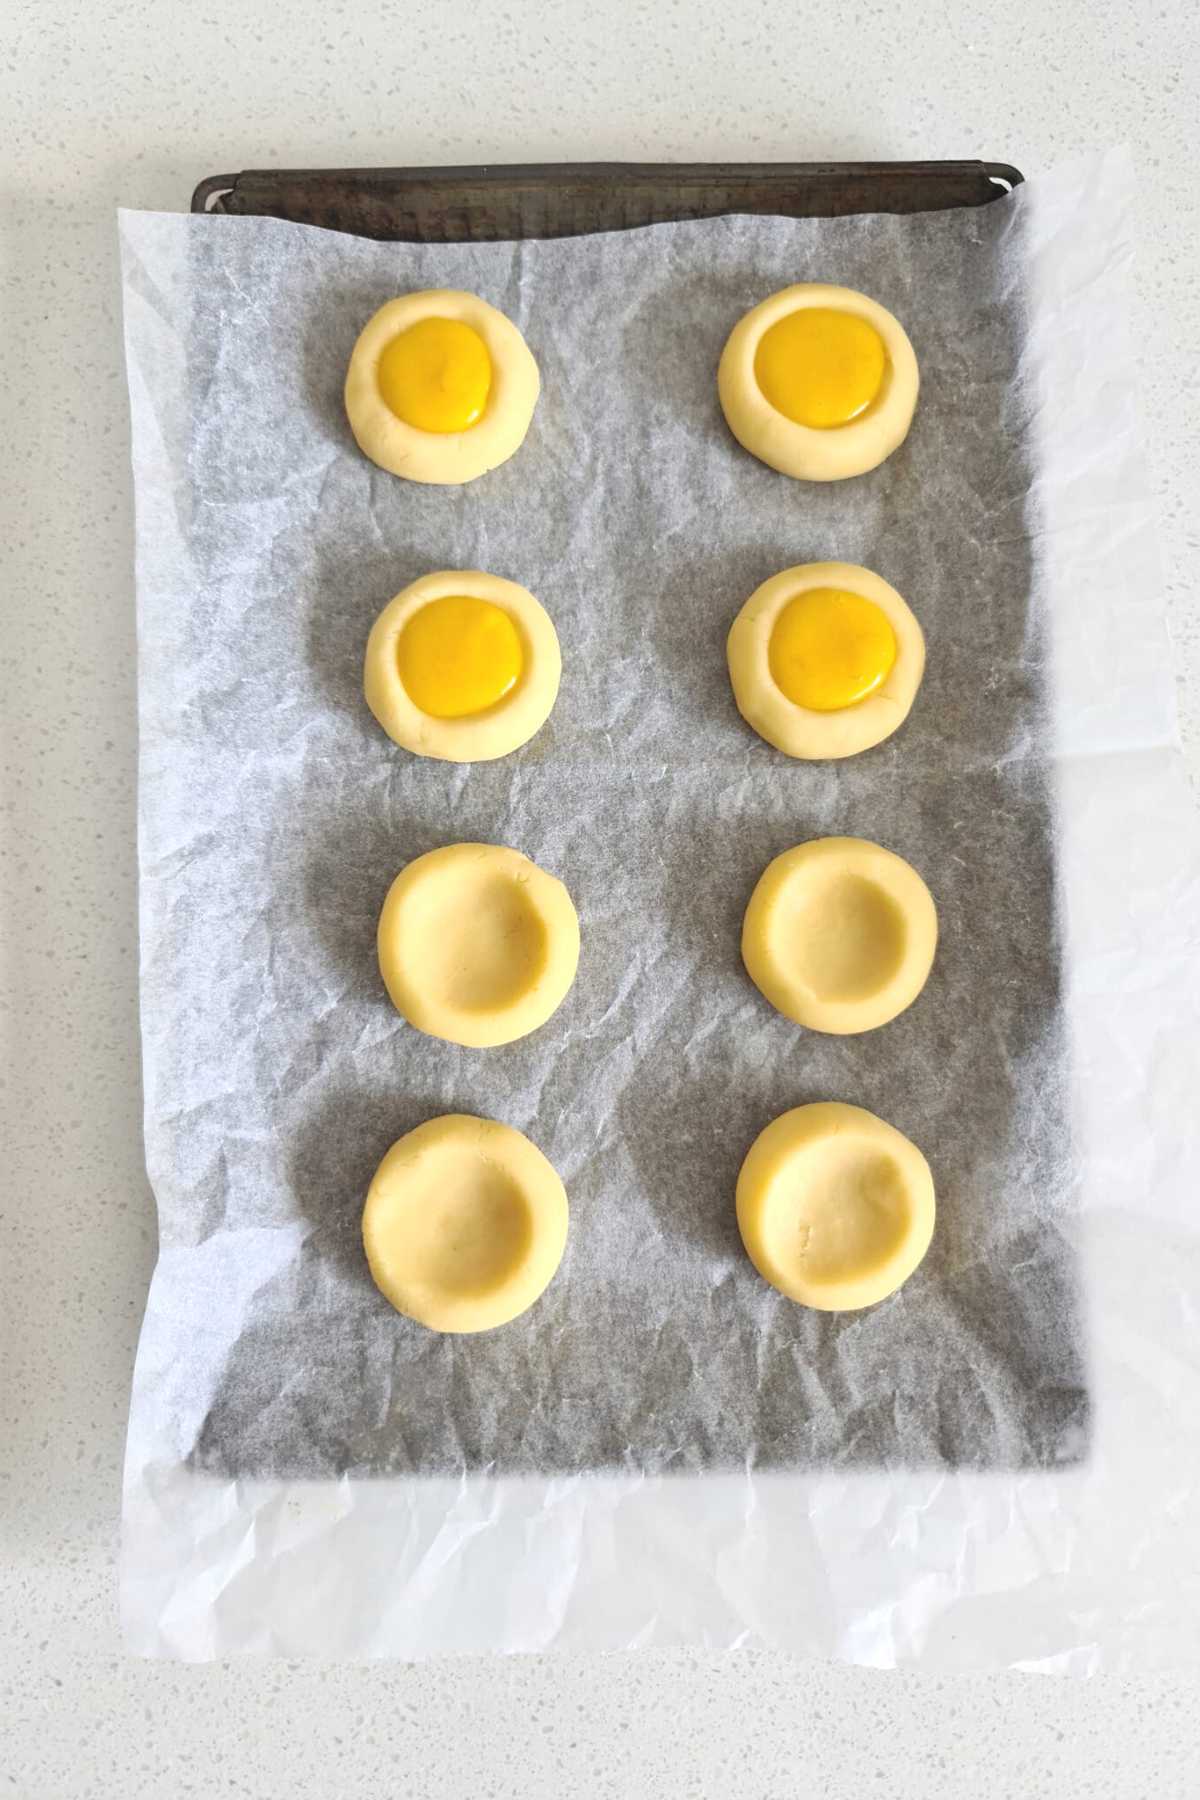 fill the cookies with lemon curd